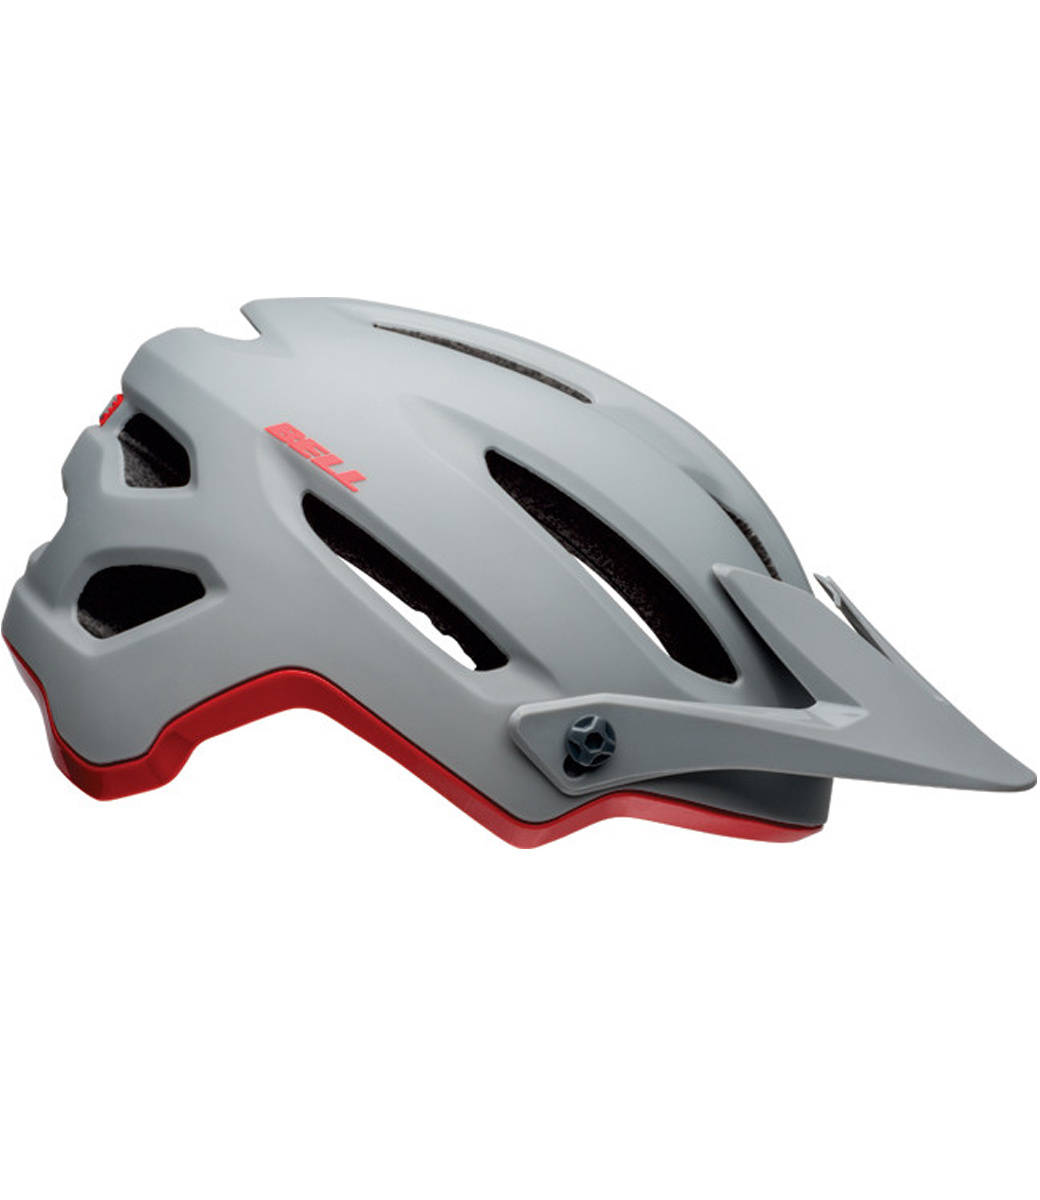 Be surprised Retaliation color Casque Vtt Bell 4forty Sale, 59% OFF | www.smokymountains.org